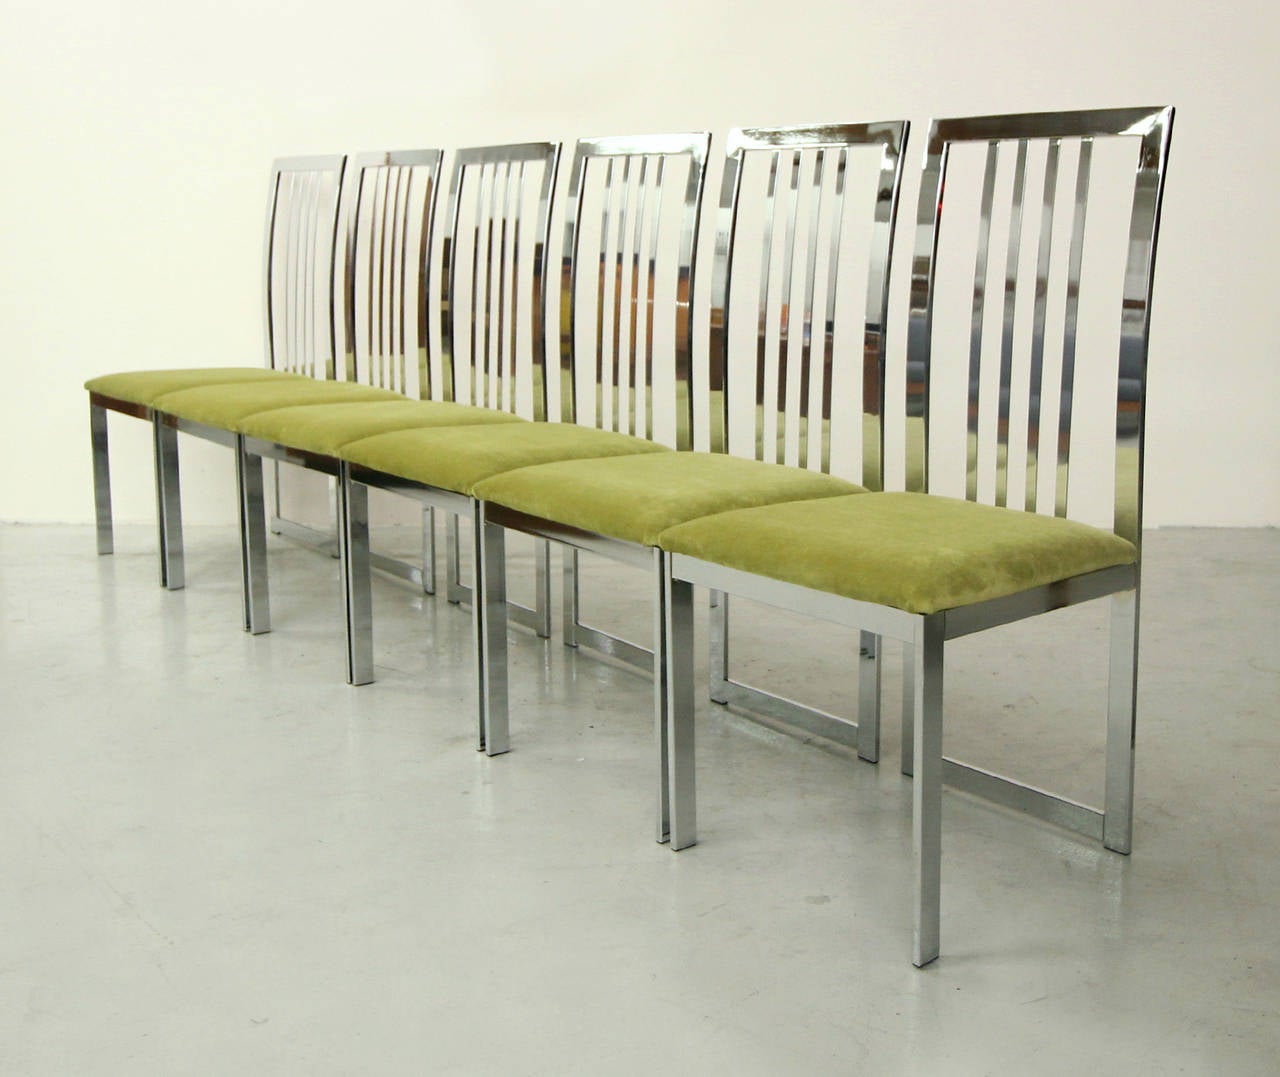 Exquisite set of 6 all chrome dining chairs designed by Milo Baughman for Design Institute America (DIA).  Mirrored chrome, Rare, Modern beauties.  Newly upholstered.

Manufactured in July 1993